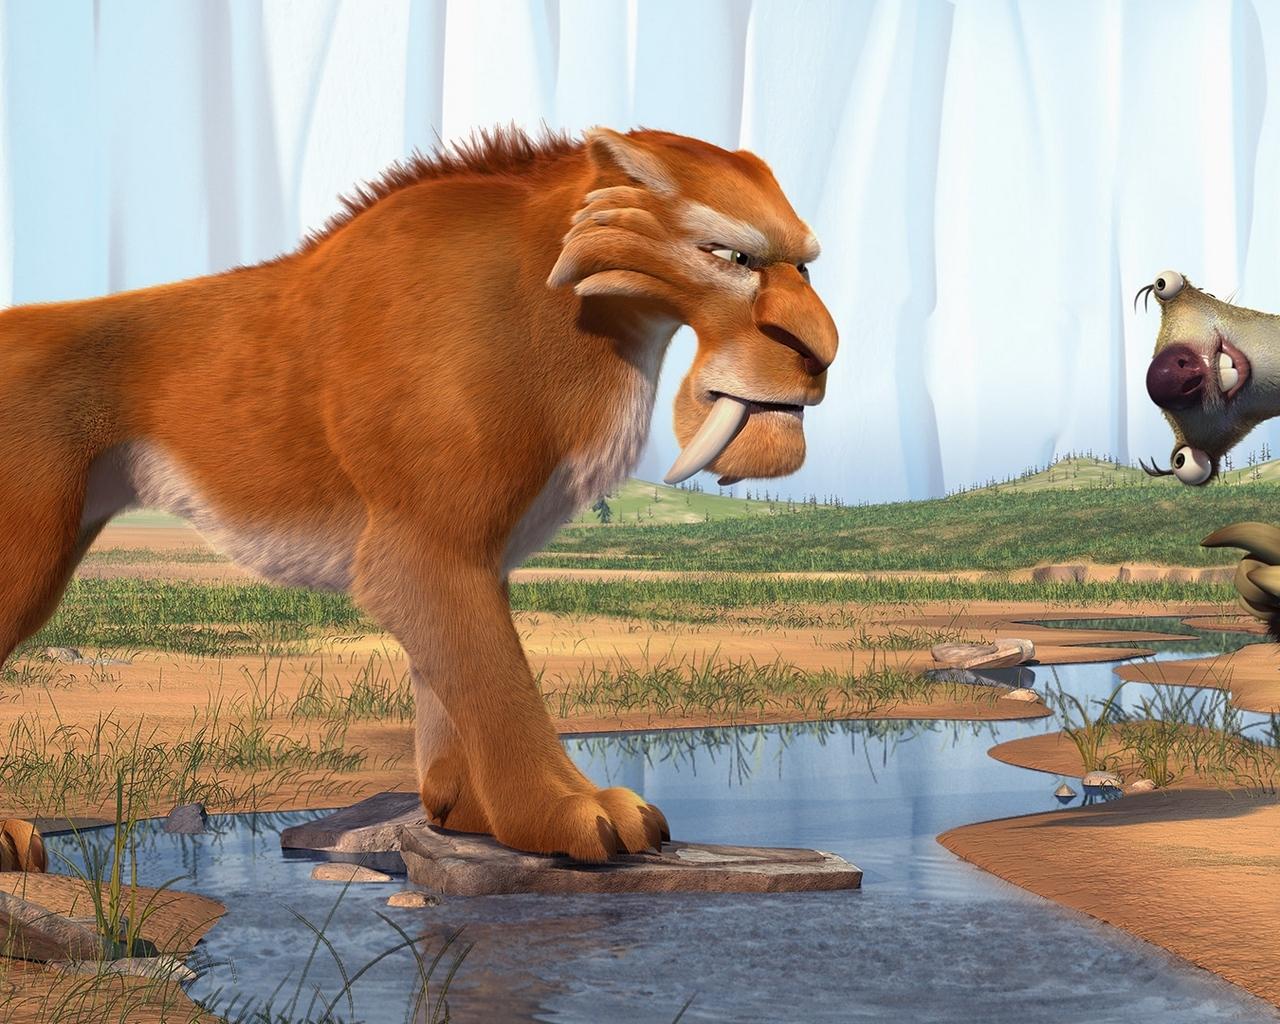 Download wallpaper 1280x1024 ice age, diego, sid, saber